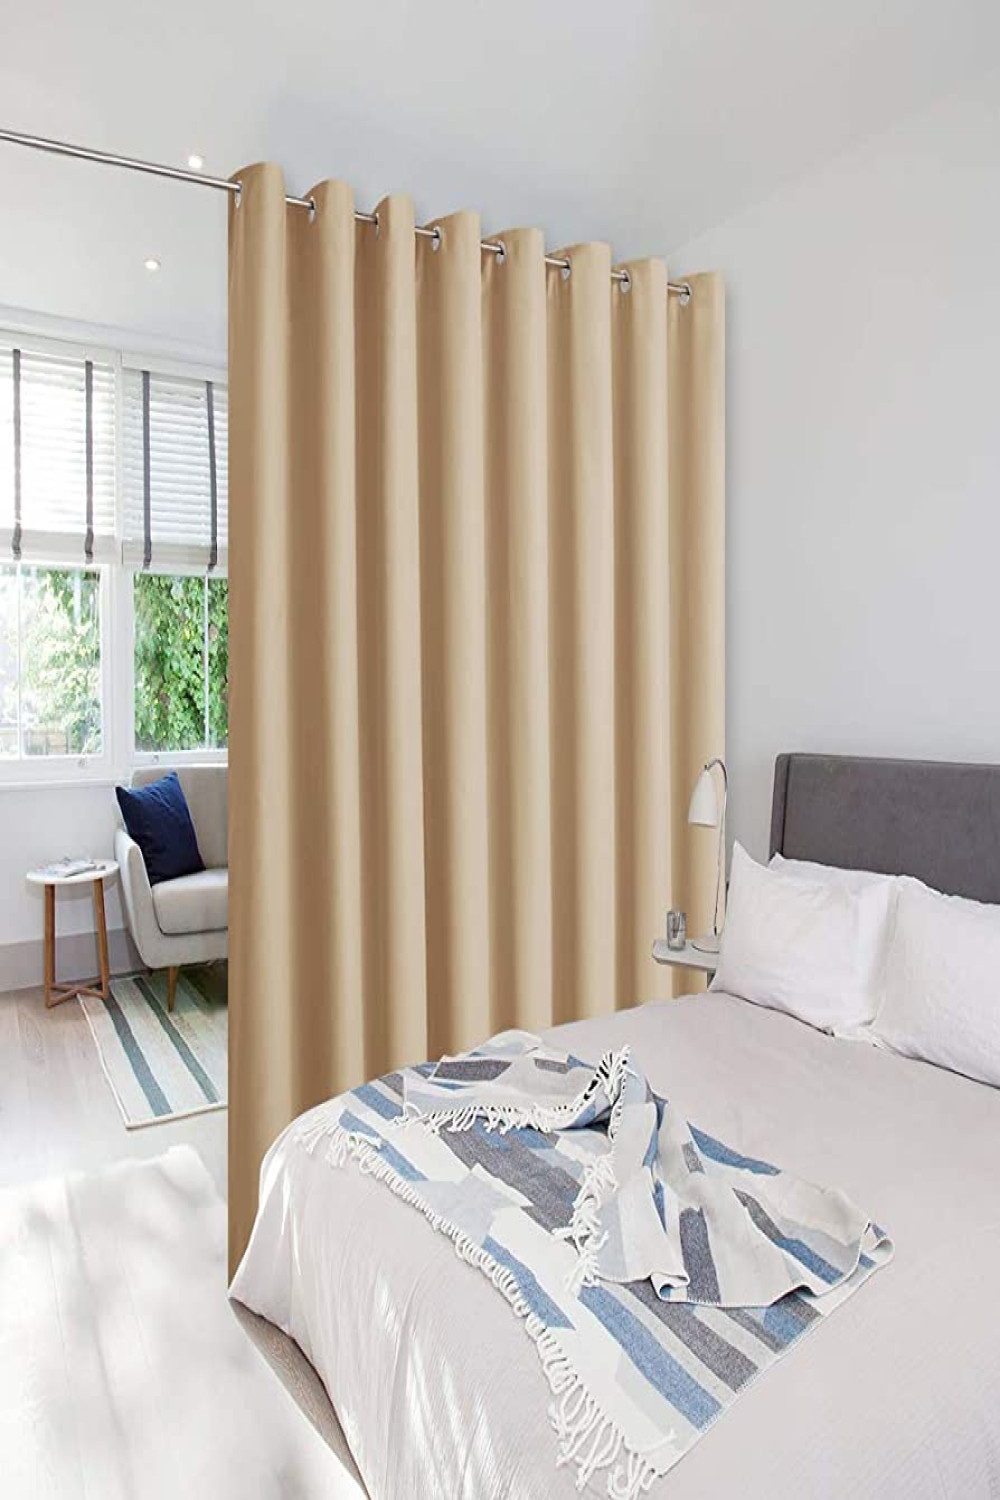 NICETOWN Sound Barrier Room Divider Curtain Screen Partitions, Wide Width  Grommet Top Room Dividers Ideas for Office, Loft, Dorm, Hotel, Living Room